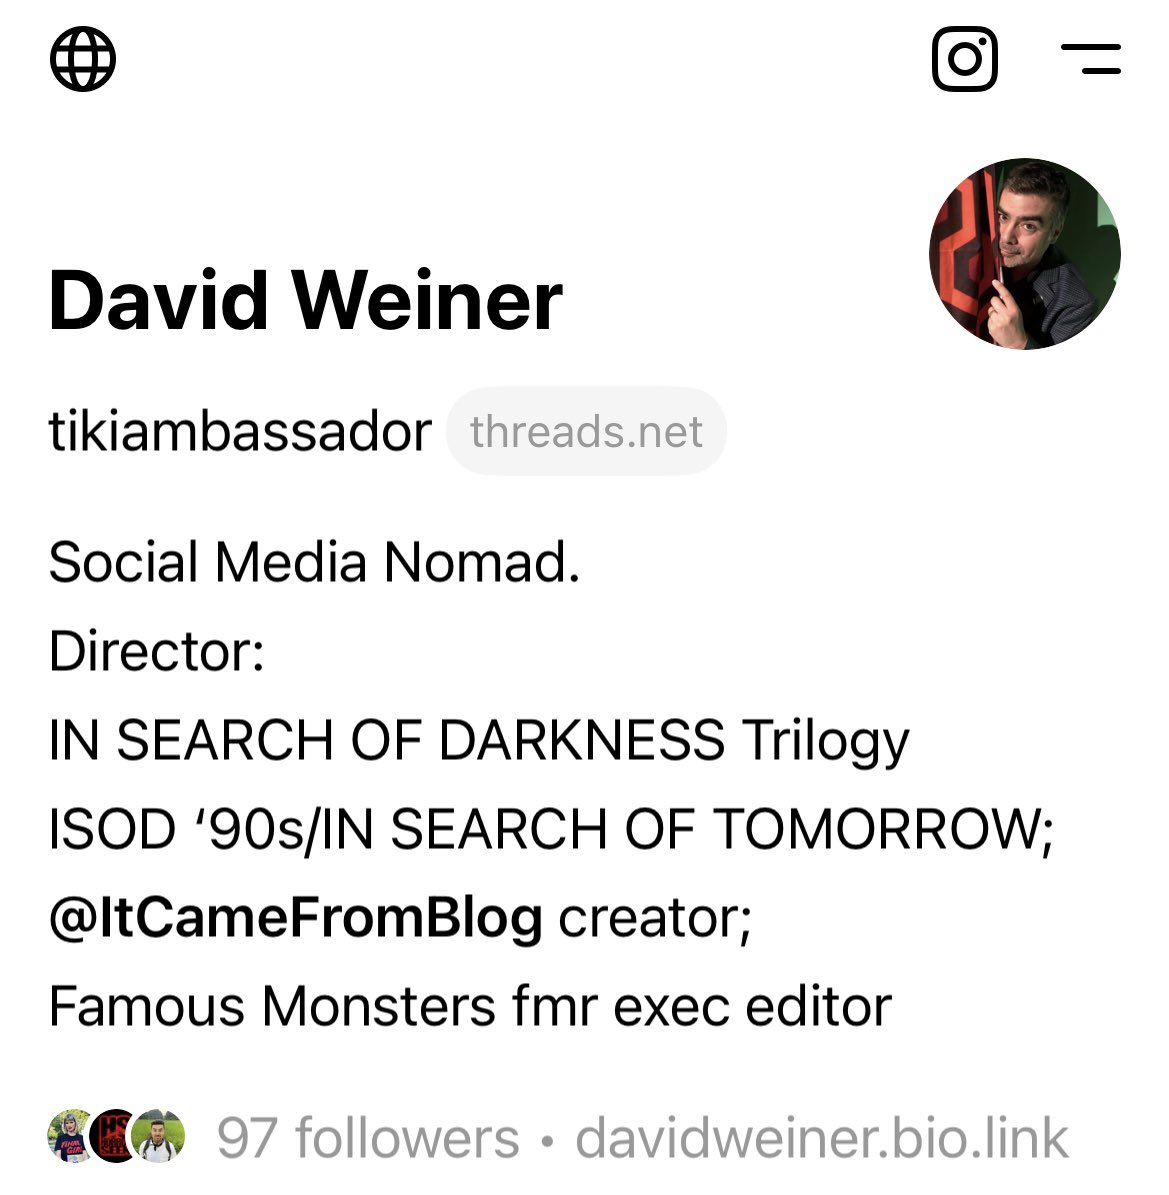 Hey Twitterers, if you’re also now Threaders, you can connect with me there as I expand my “social media nomad” footprint.